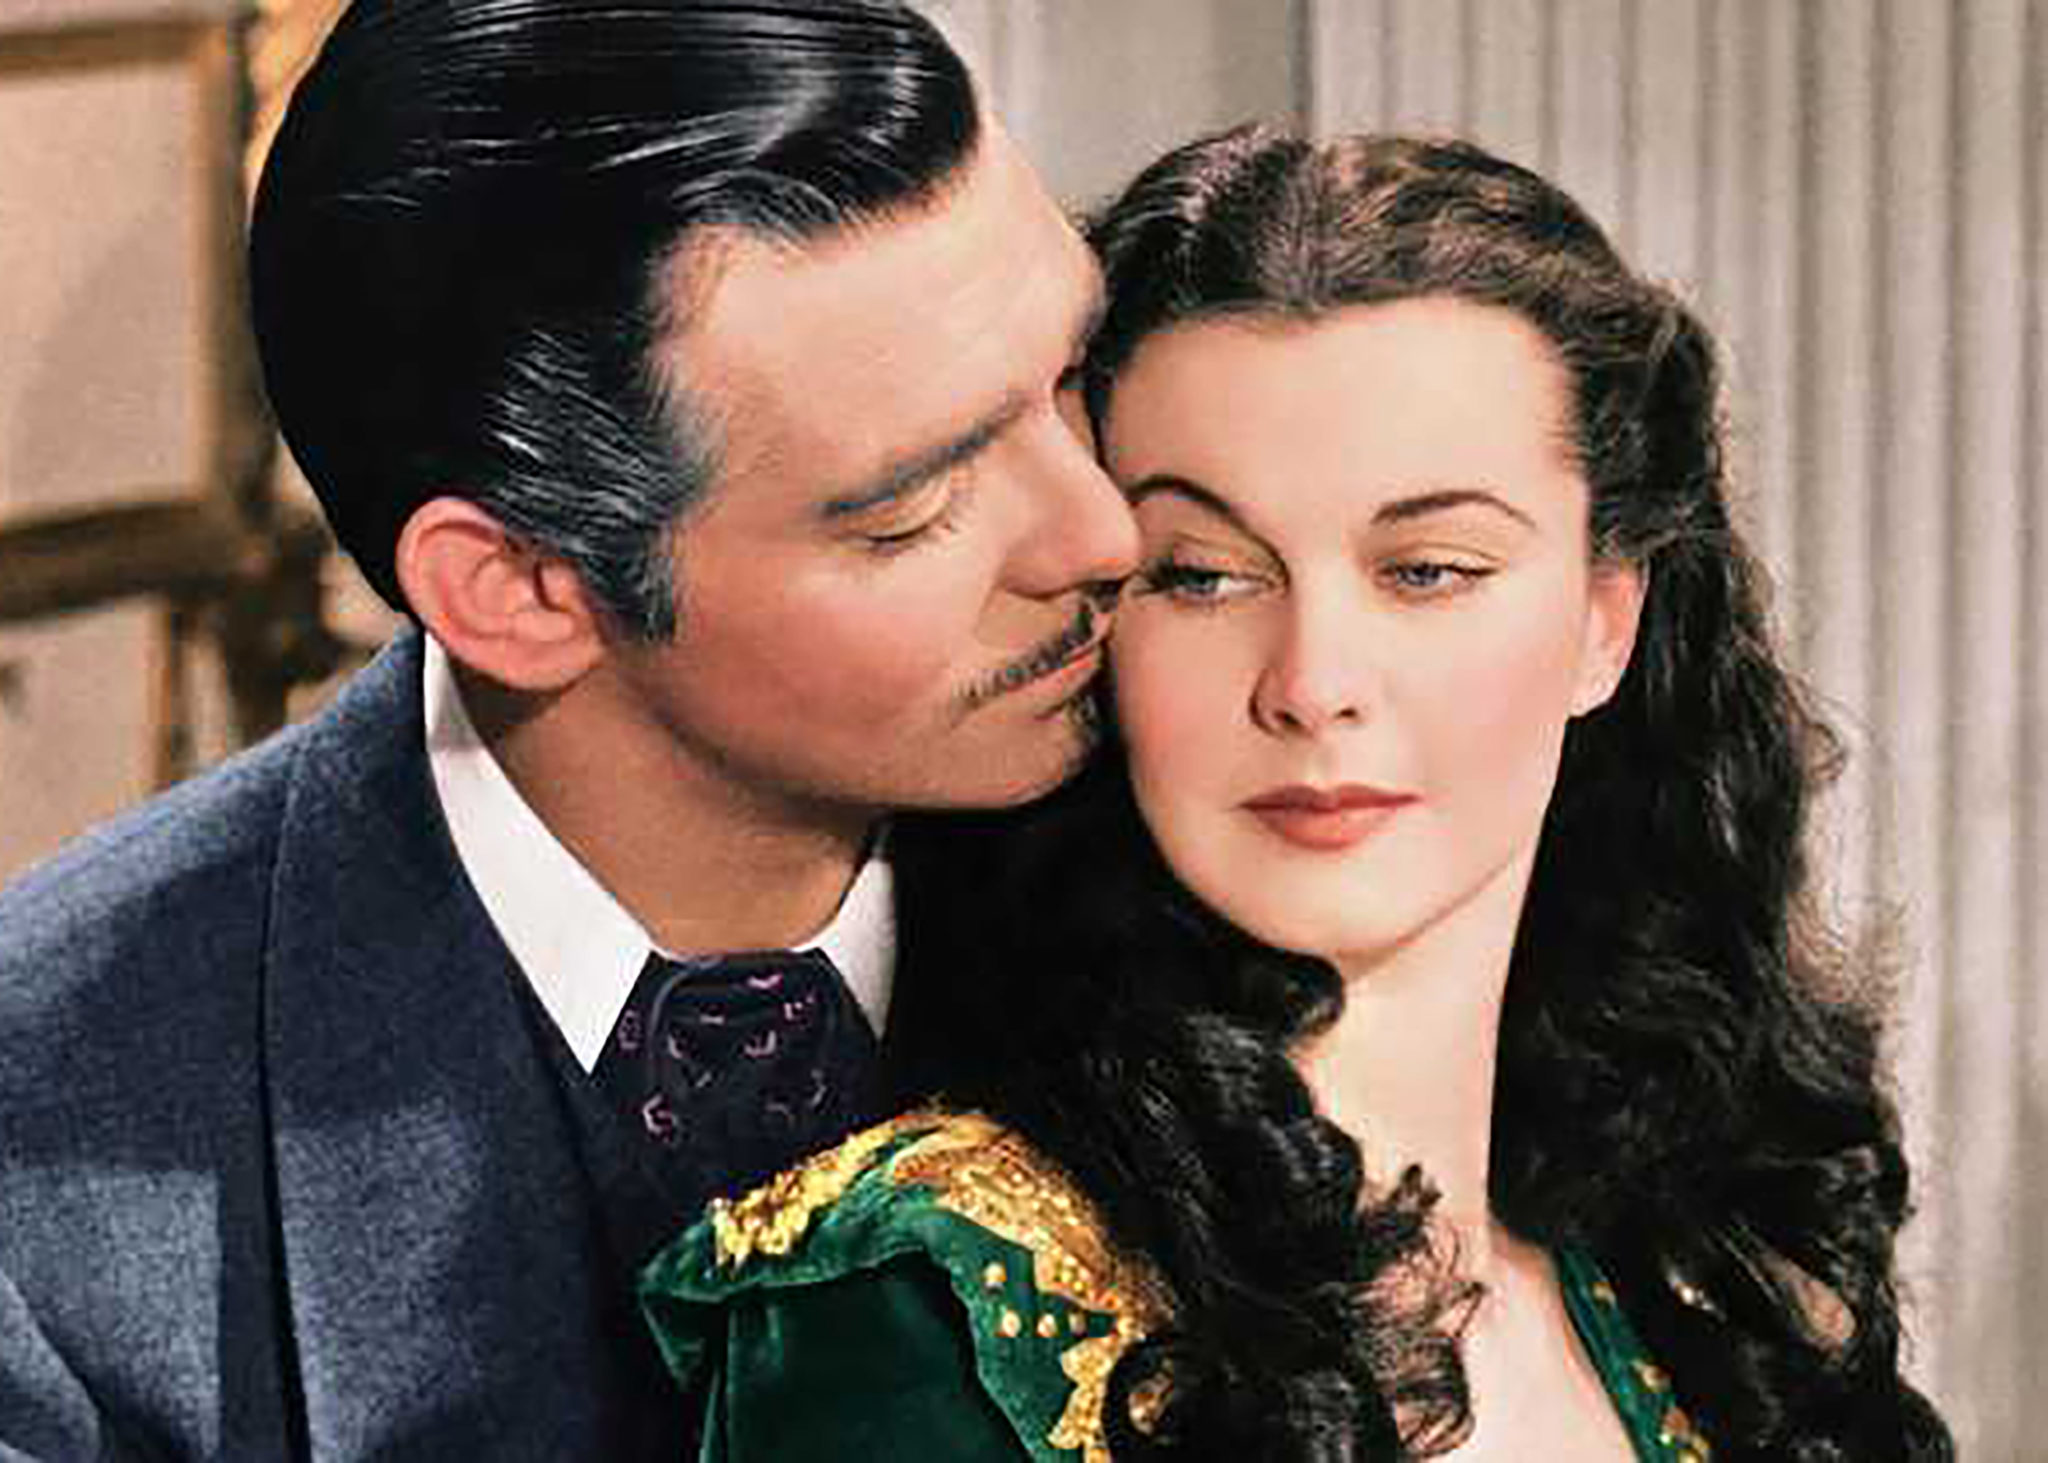 Snapshot from Gone With the Wind